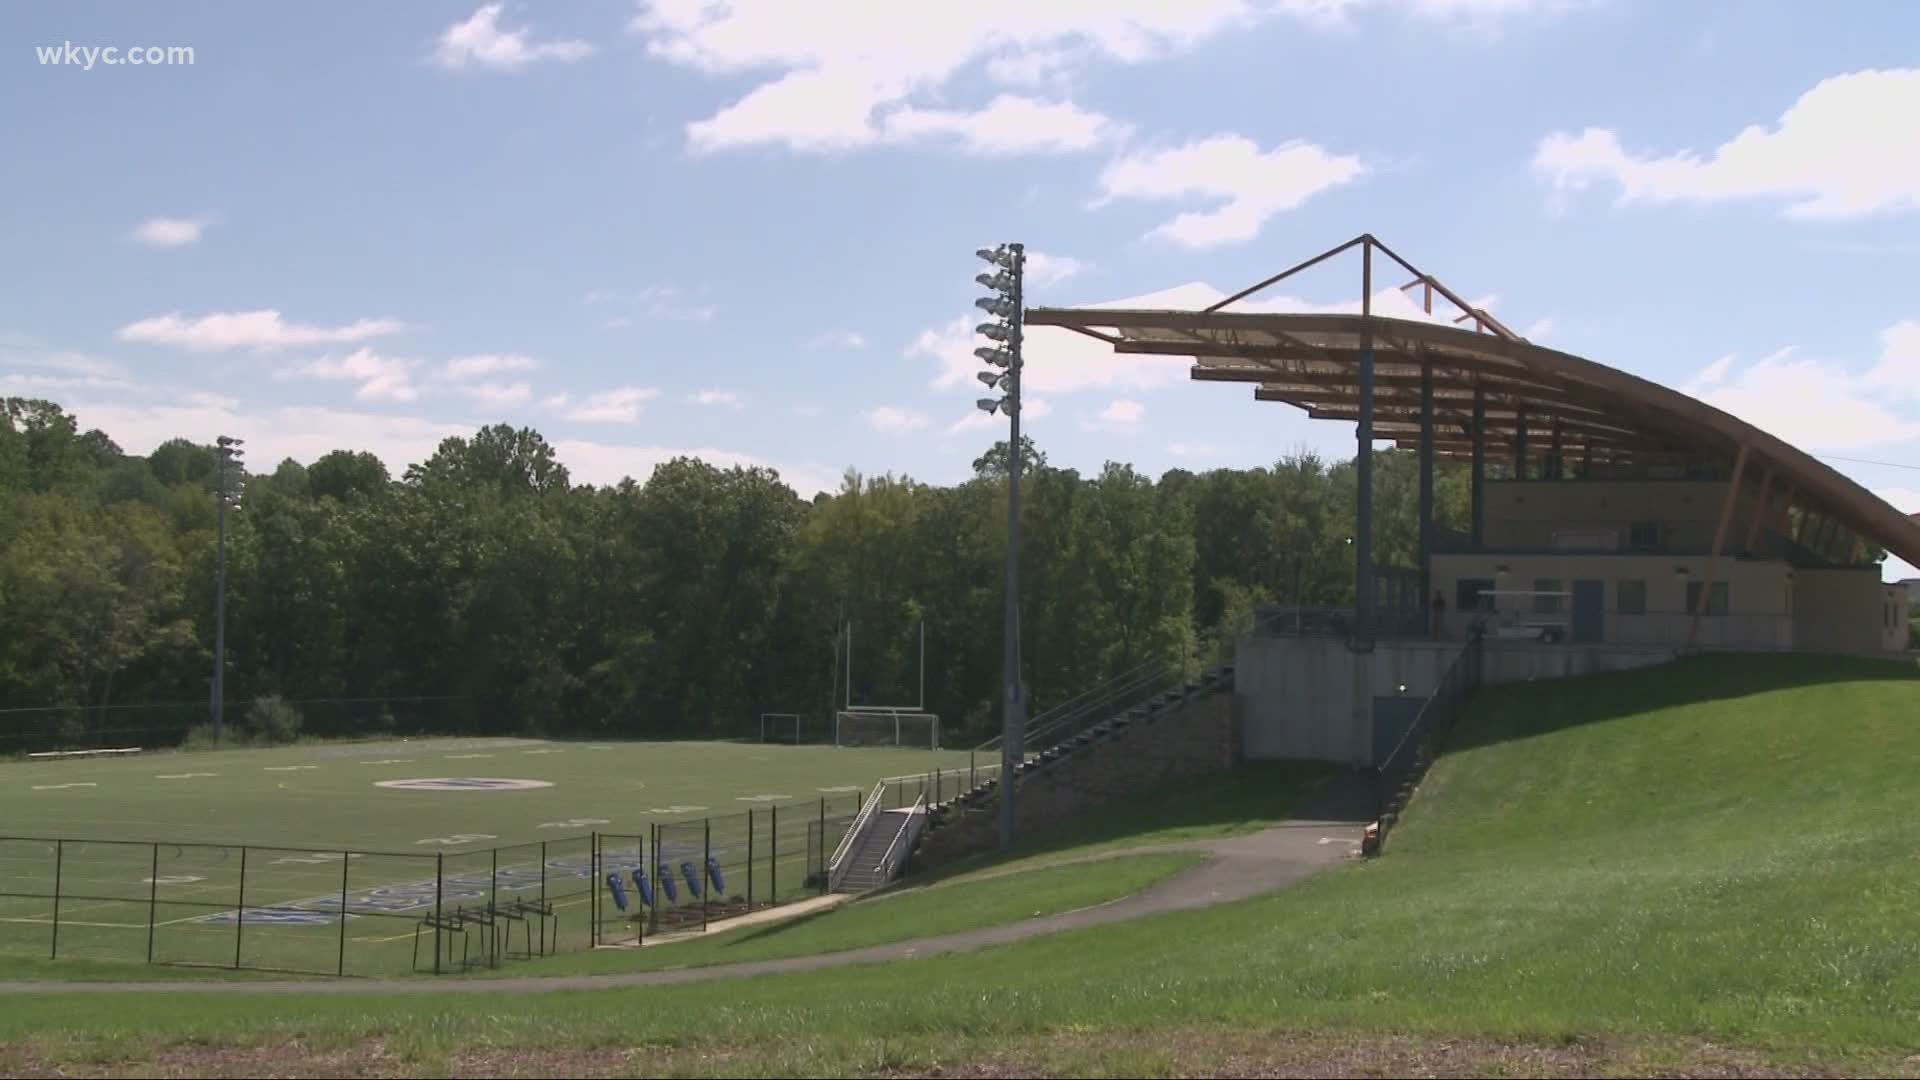 The state of Ohio is reopening pools, campsites, summer camps and some sports. Many parents are trying to decide what to allow their children to participate in.